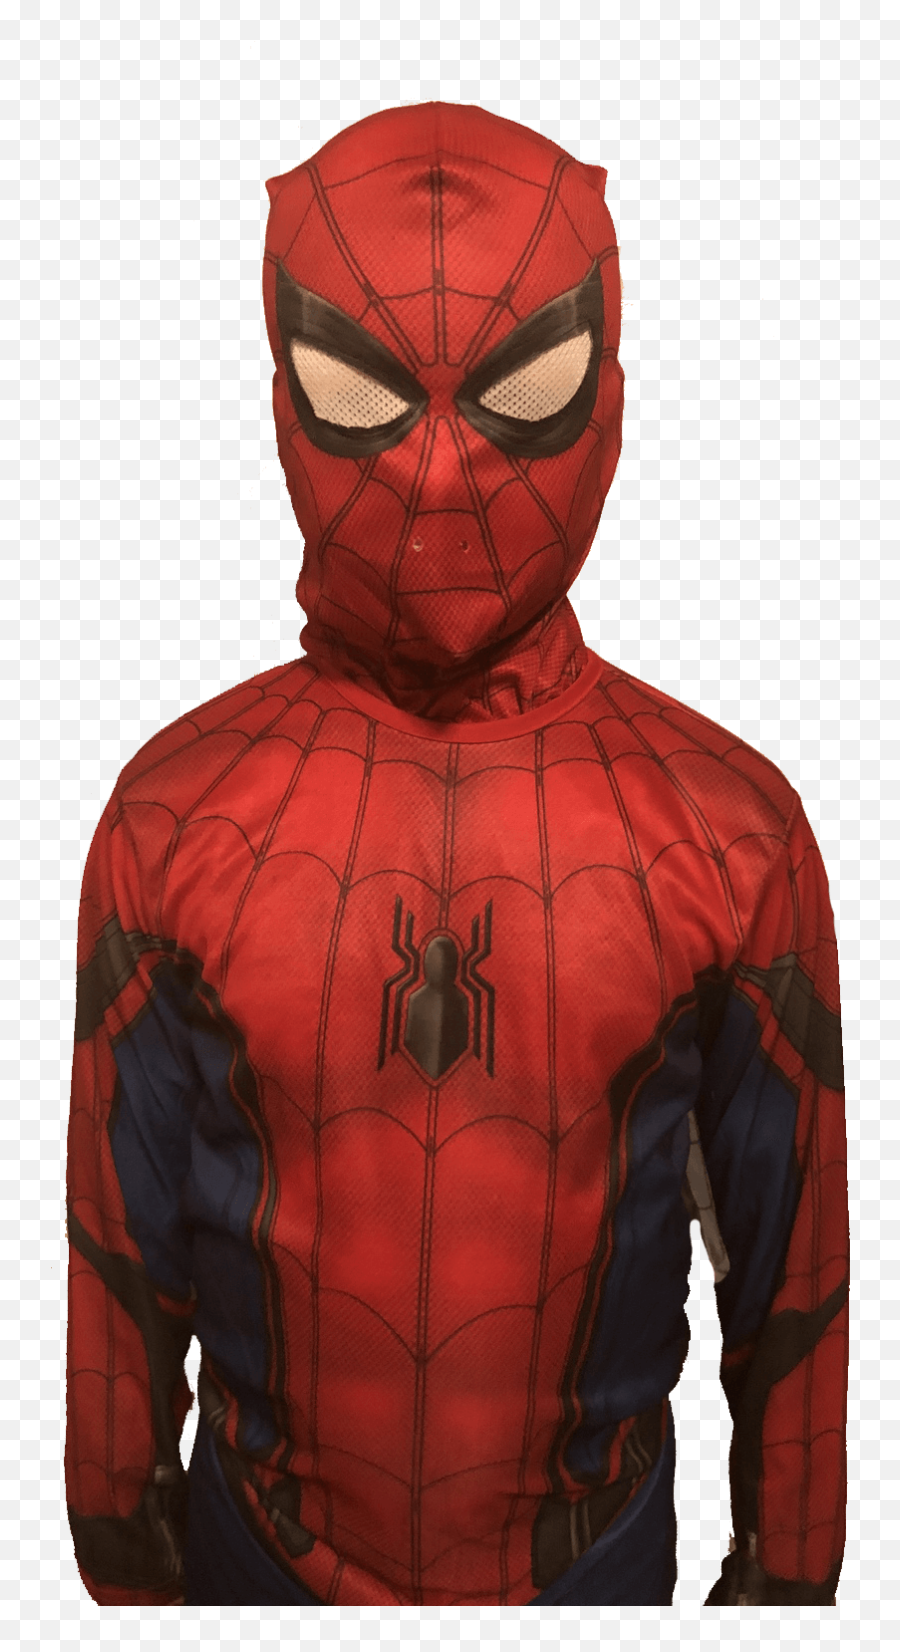 Insect Biomimicry And Why I Love Spider - Man Purdue Png,Spiderman Mask Png